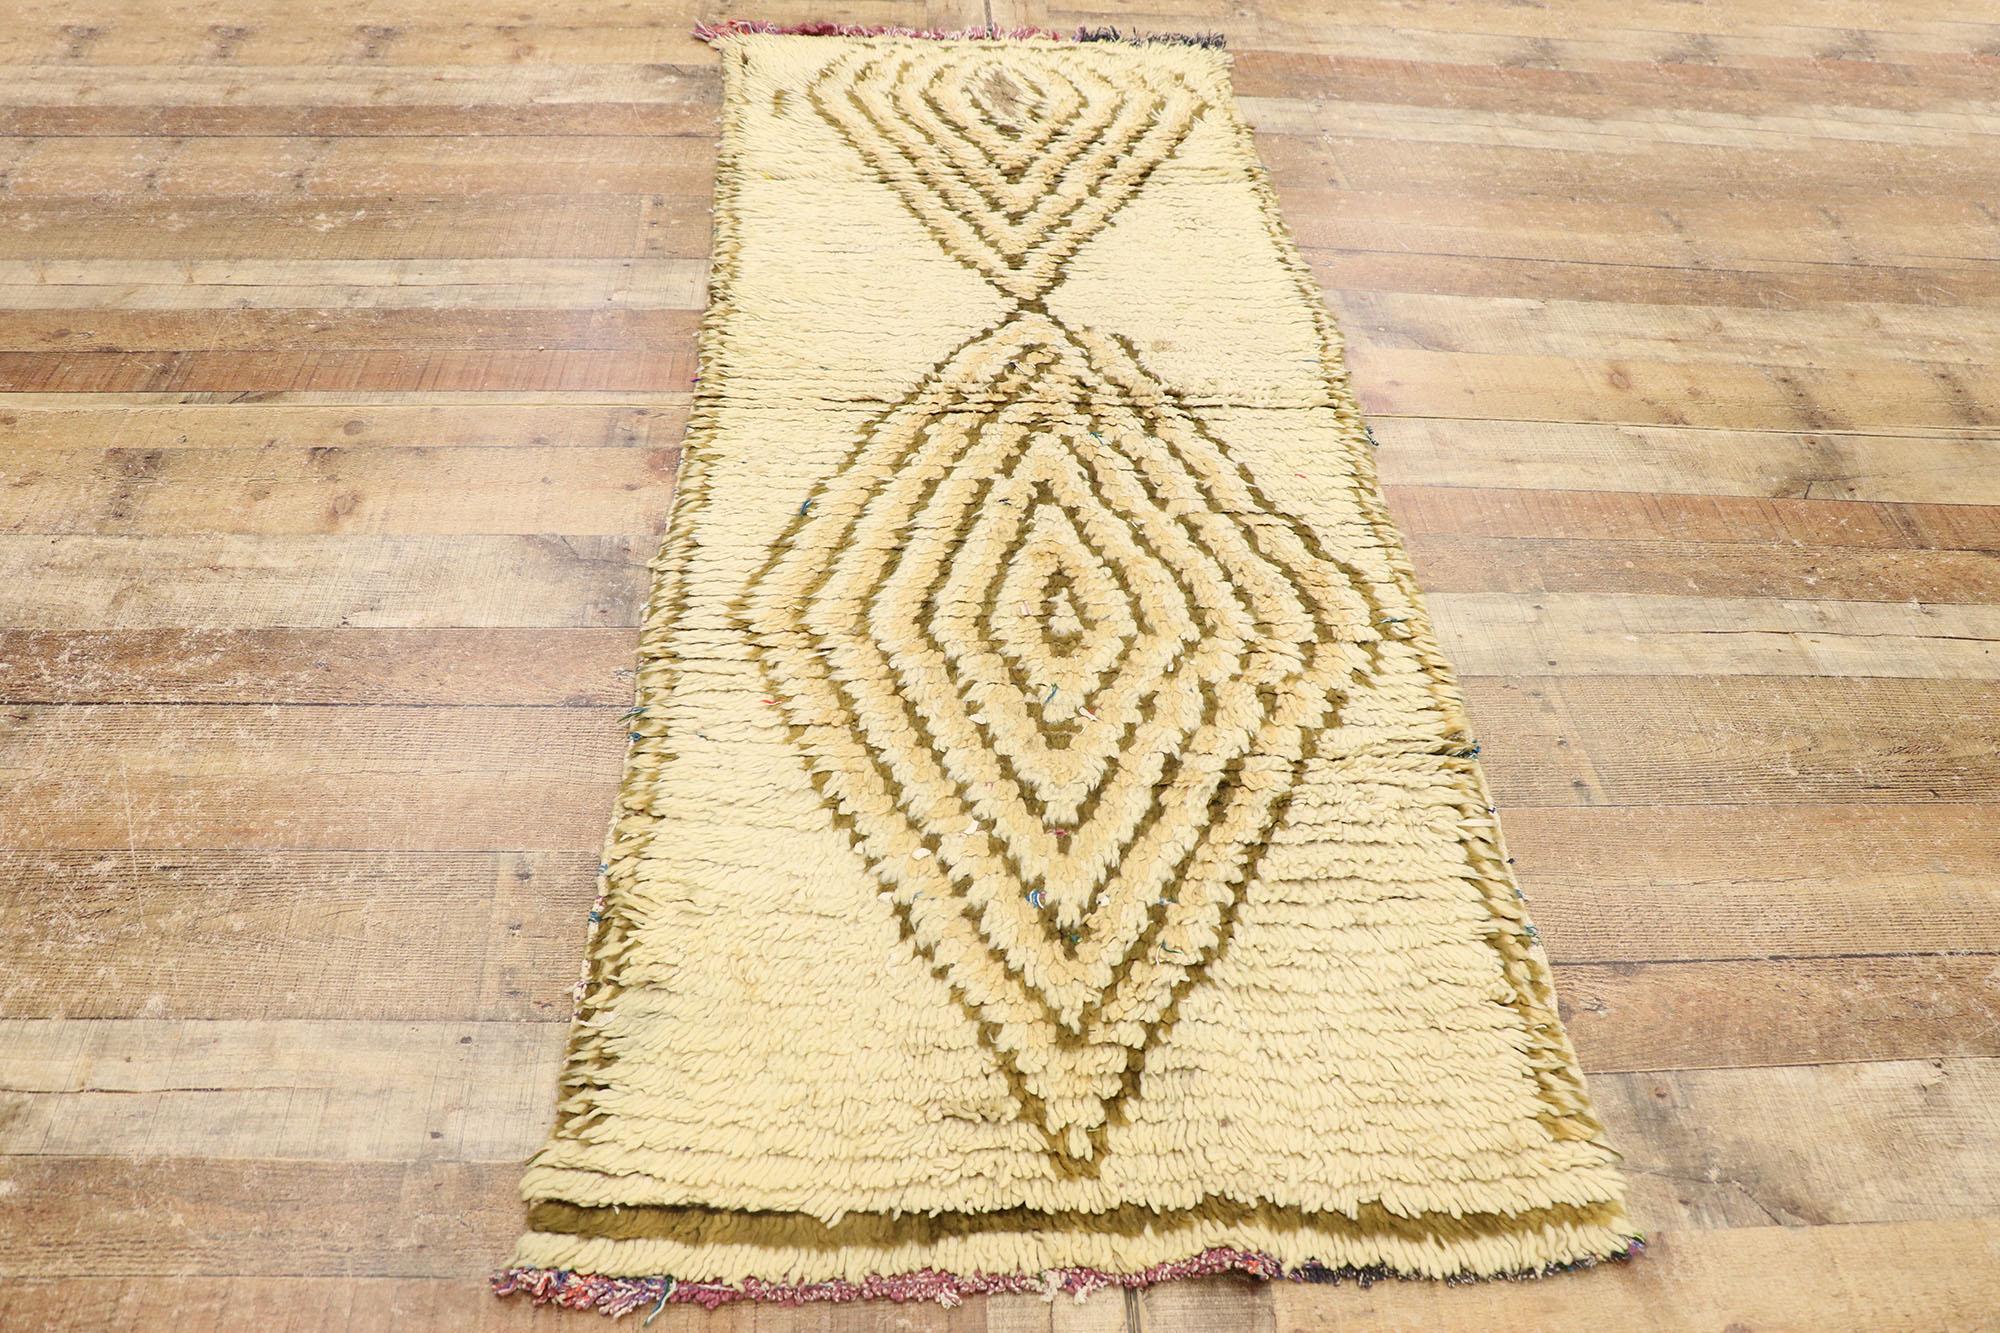 21585 Vintage Berber Moroccan Boucherouite rug with Modern Style 02'05 x 06'03. Warm and inviting, this hand-knotted wool and cotton vintage Berber Boucherouite Moroccan rug is a captivating vision of woven beauty. The abrashed beige field features